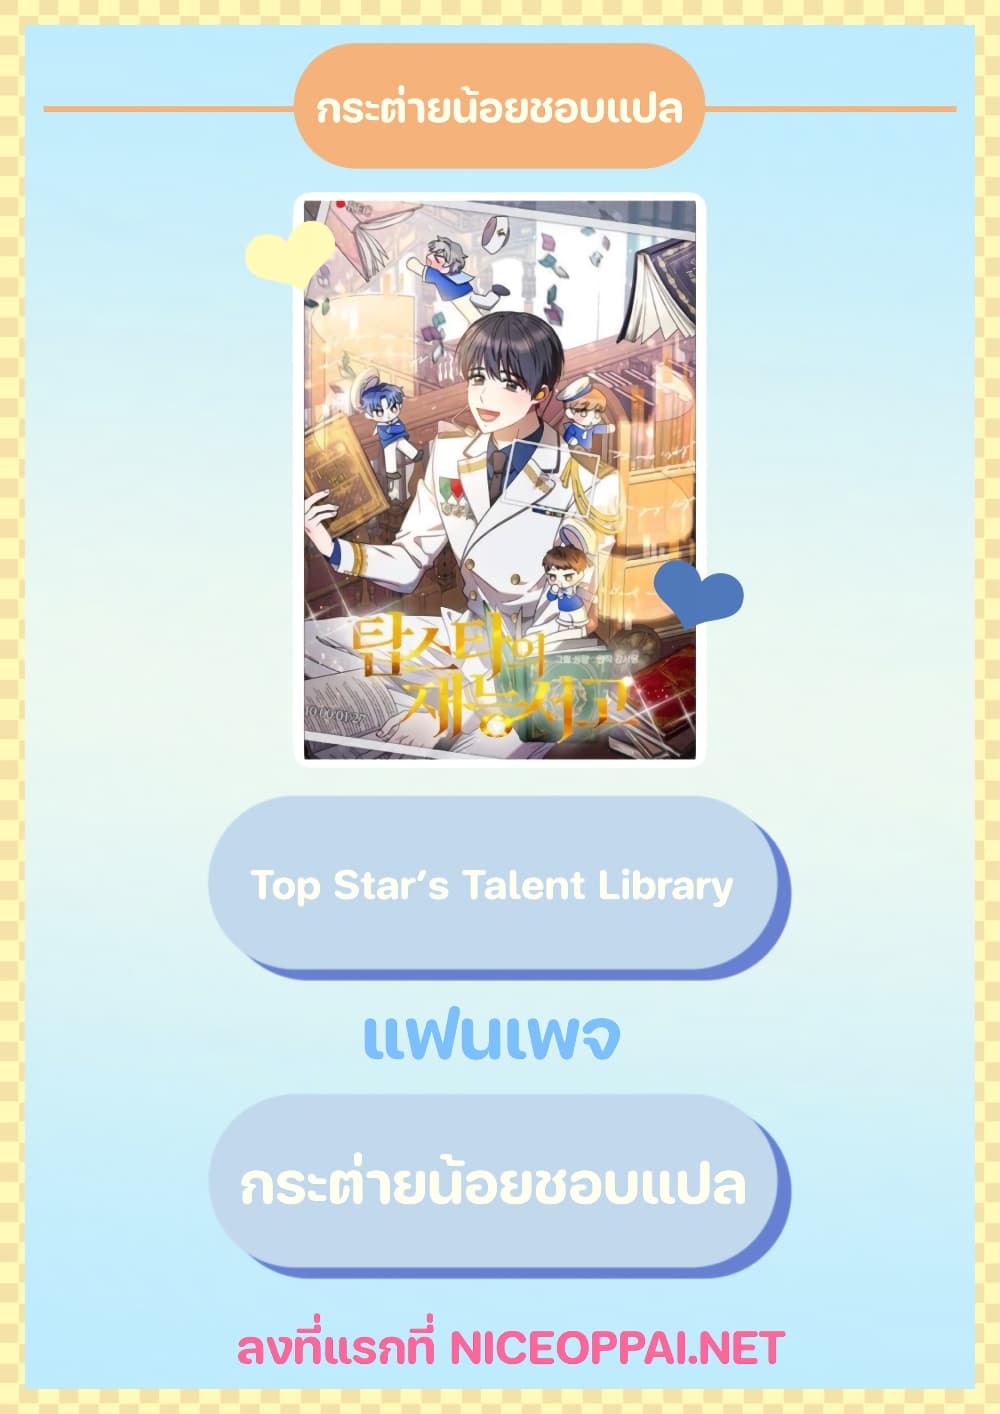 Top Star's Talent Library 16 (1)